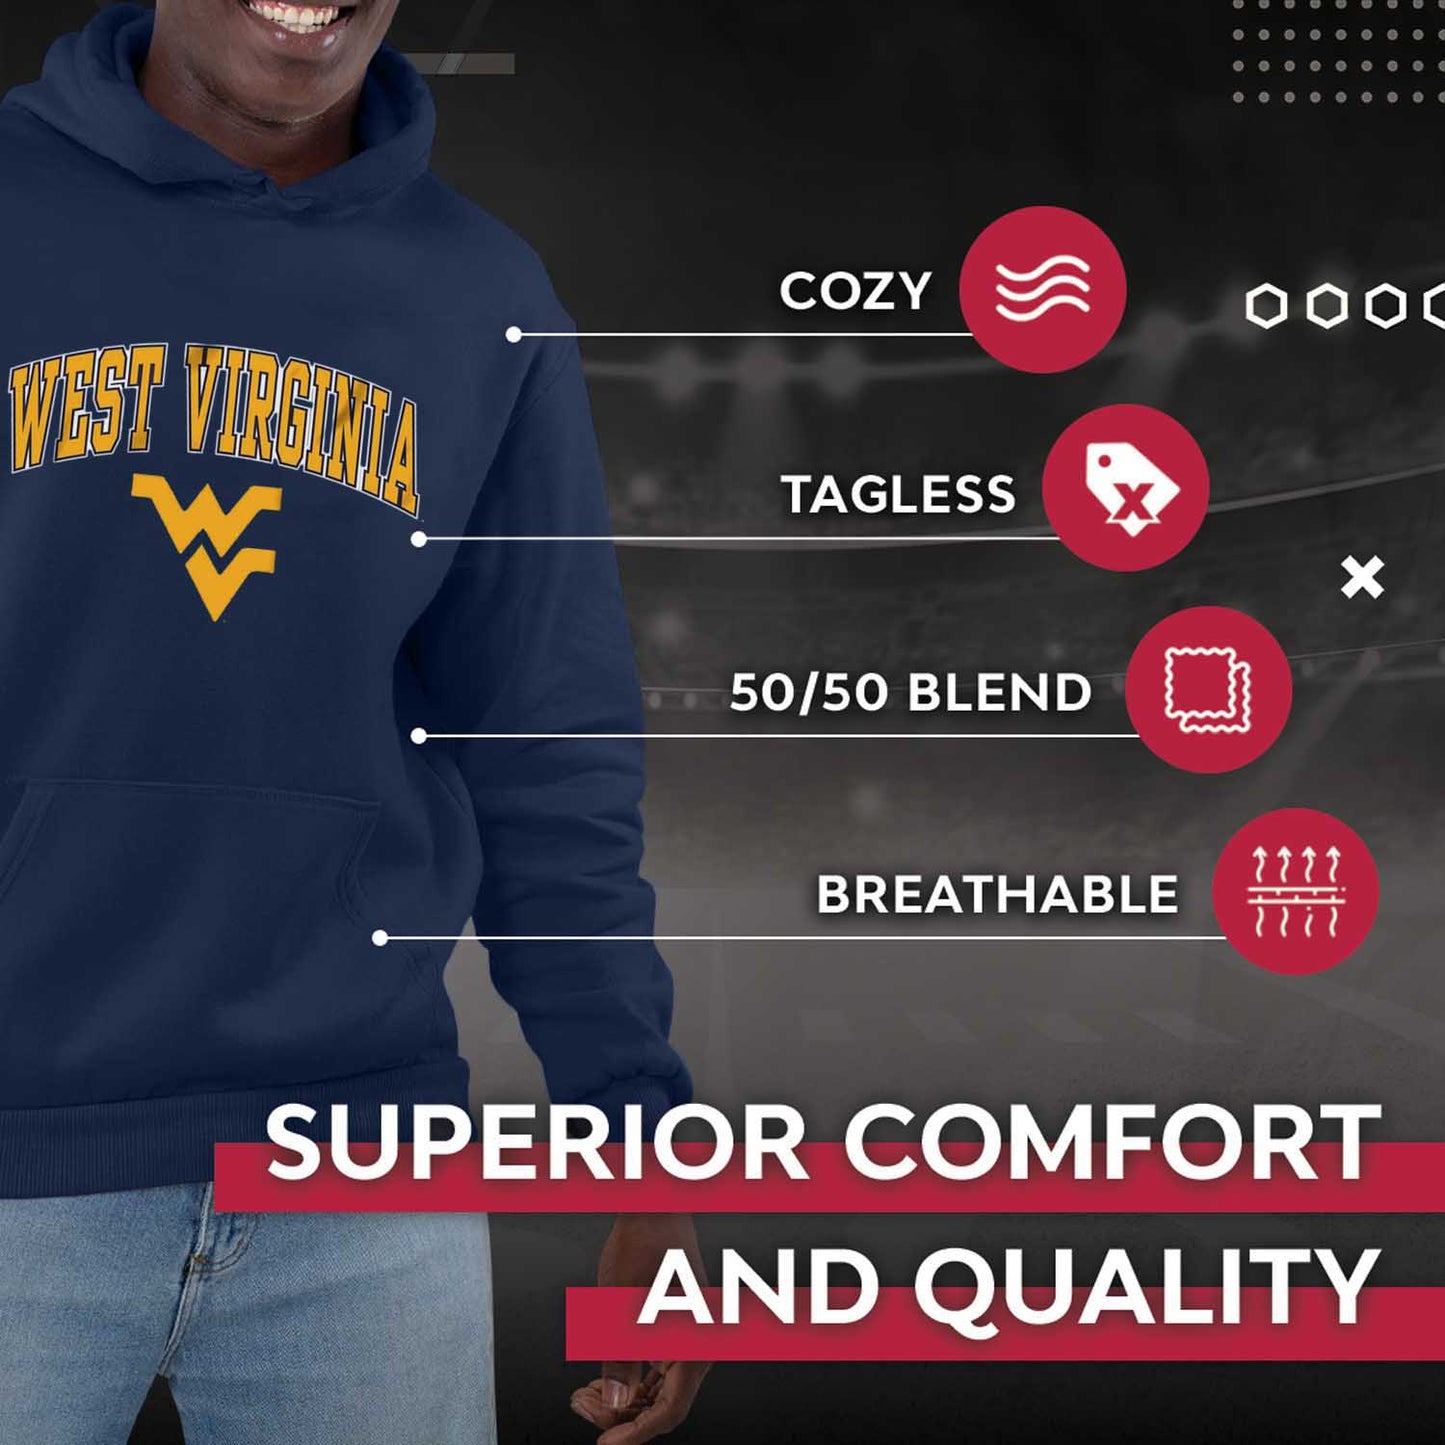 West Virginia Mountaineers Adult Arch & Logo Soft Style Gameday Hooded Sweatshirt - Navy